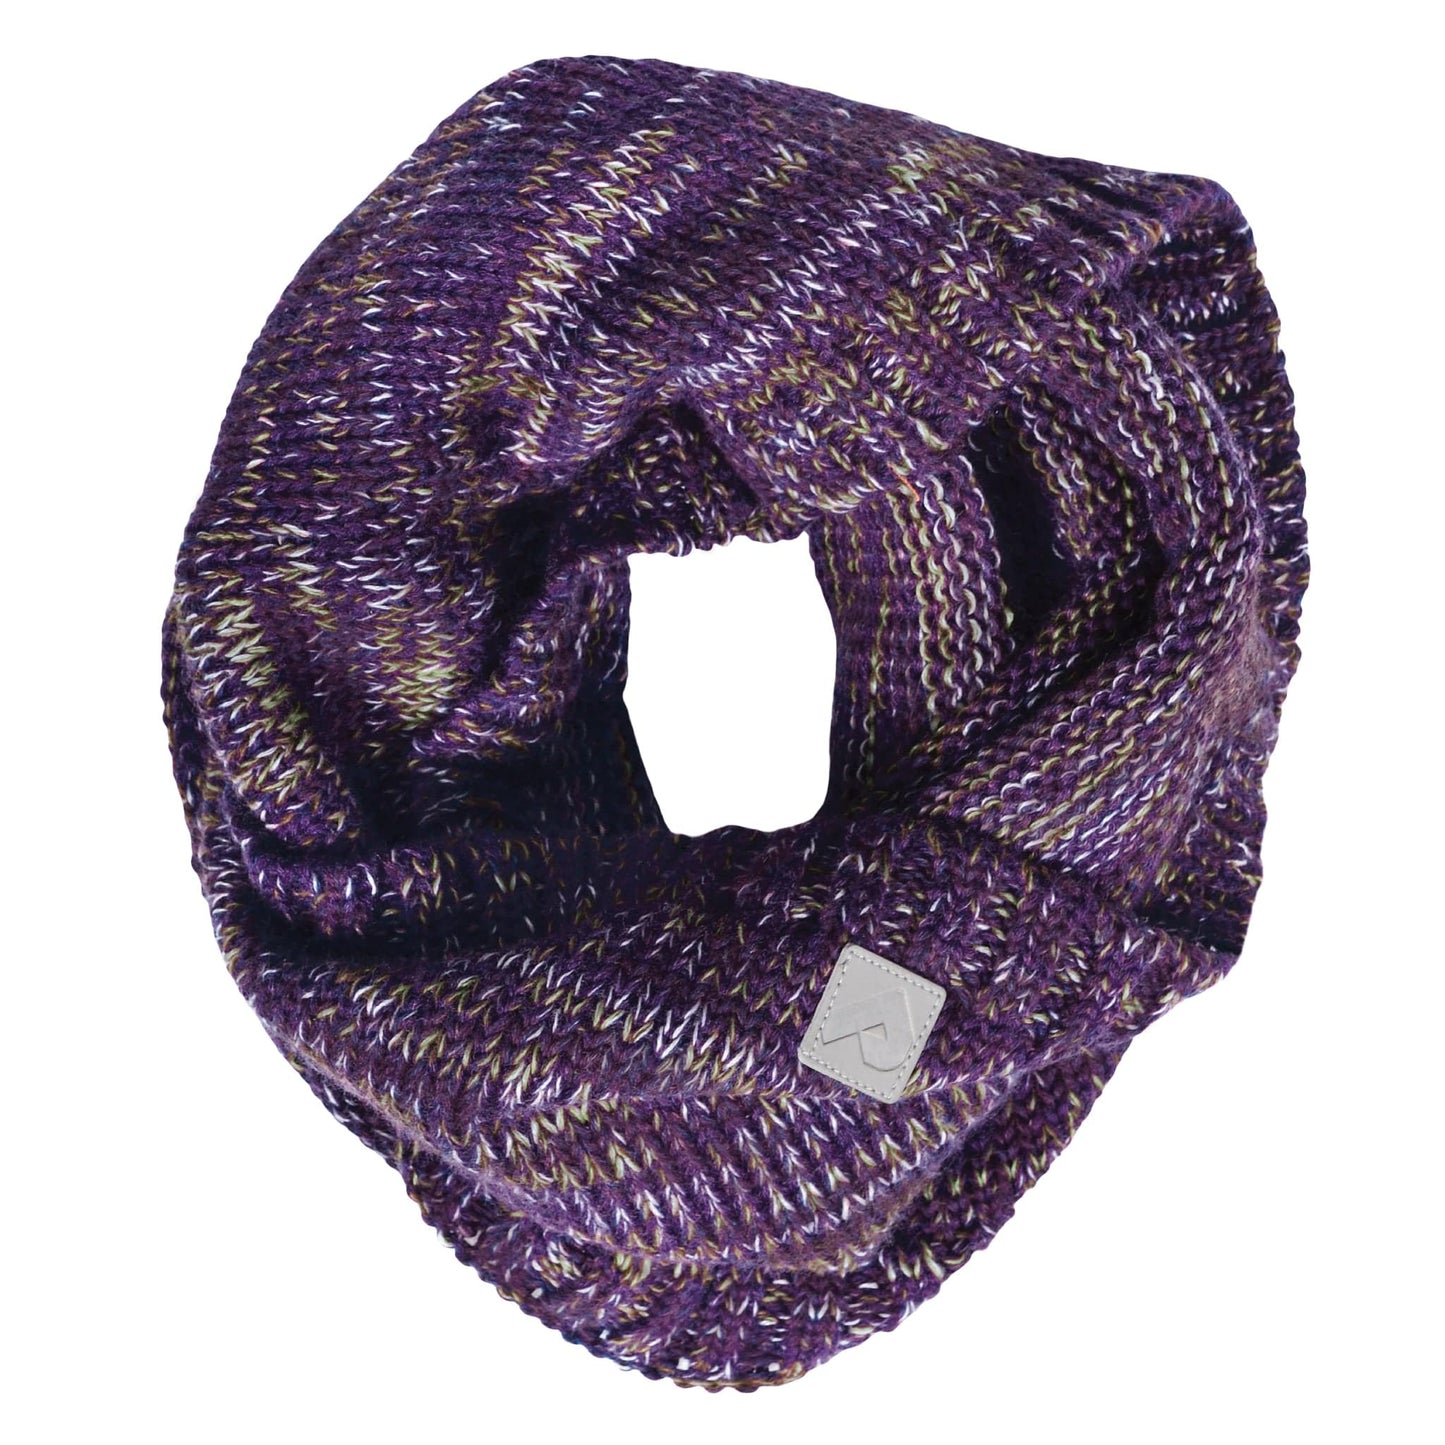 Knitted infinity scarf - Pensee